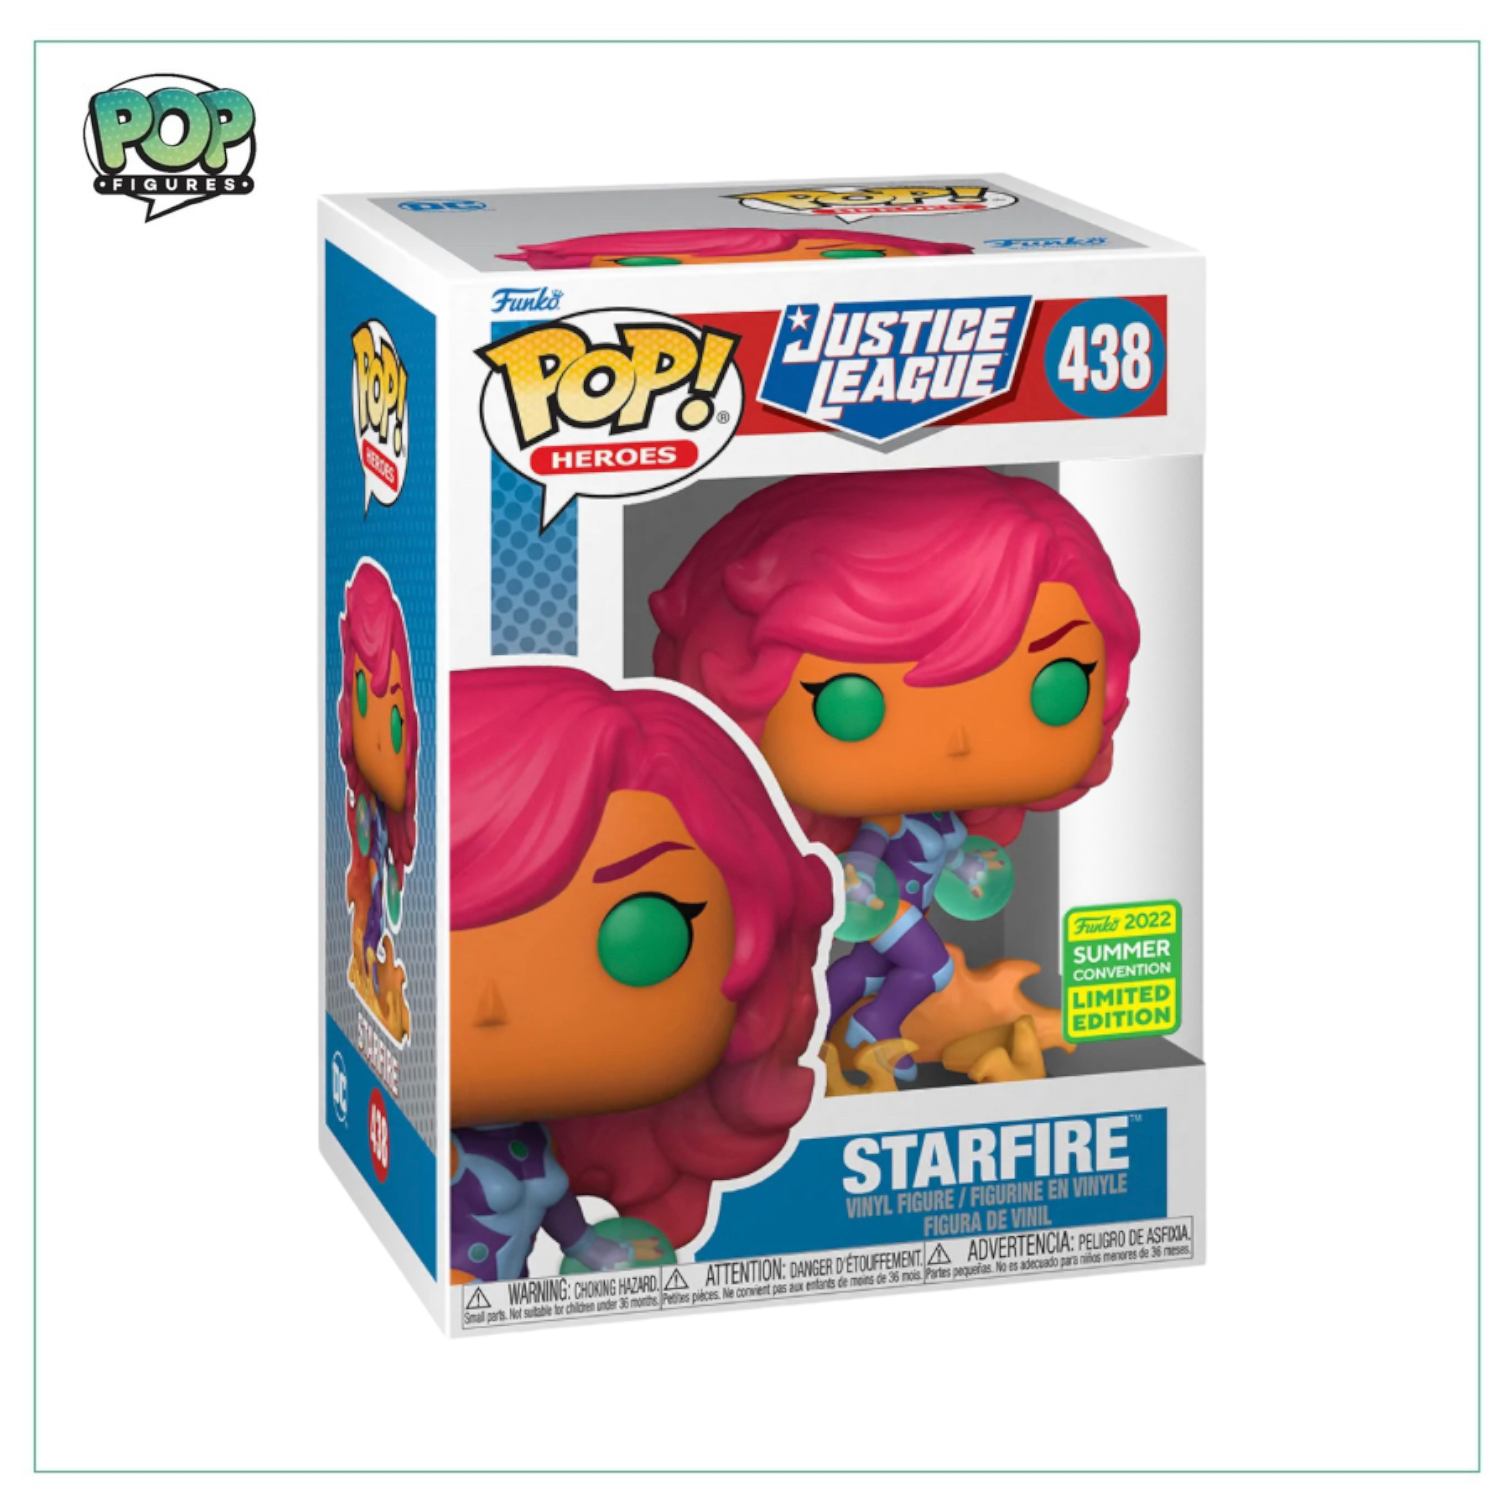 Starfire #438 Funko Pop! Heroes - 2022 SDCC Shared Exclusive - Angry Cat